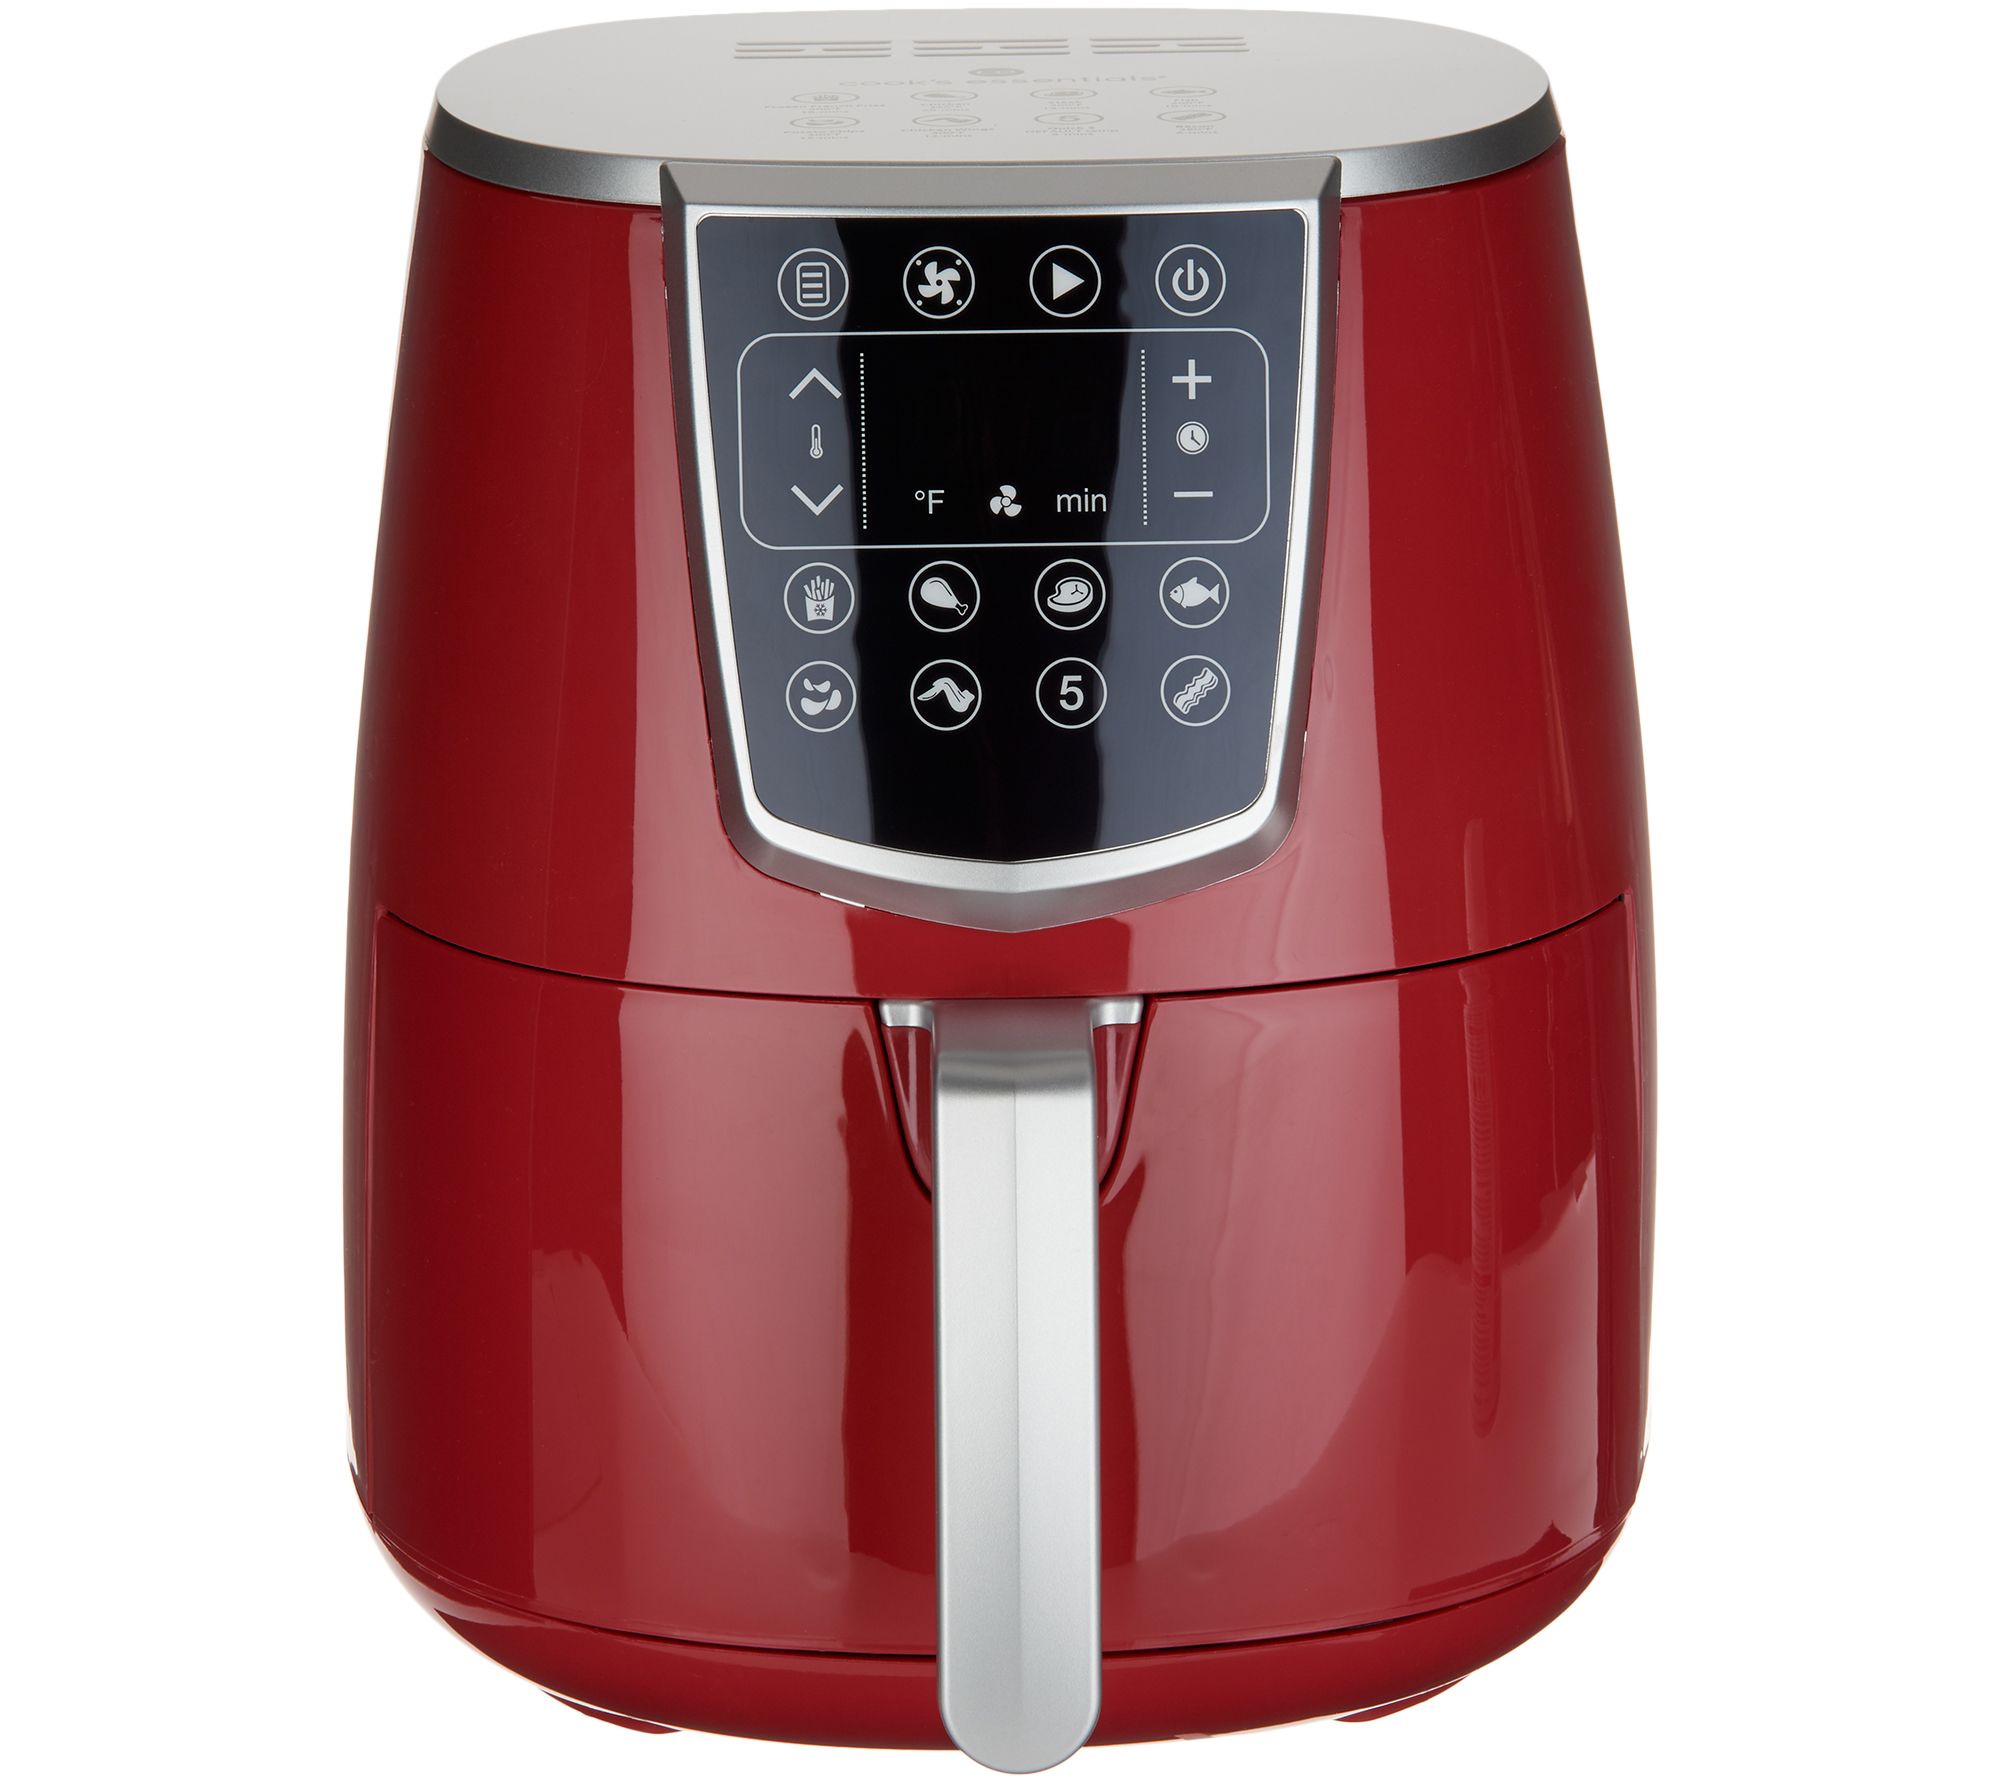 Cook's Essentials 6 Quart Digital Air Fryer, Includes Nonstick Frying  Drawer and Rack, Powerful 1500-watt Motor, 8 Unique Food Functions, Red